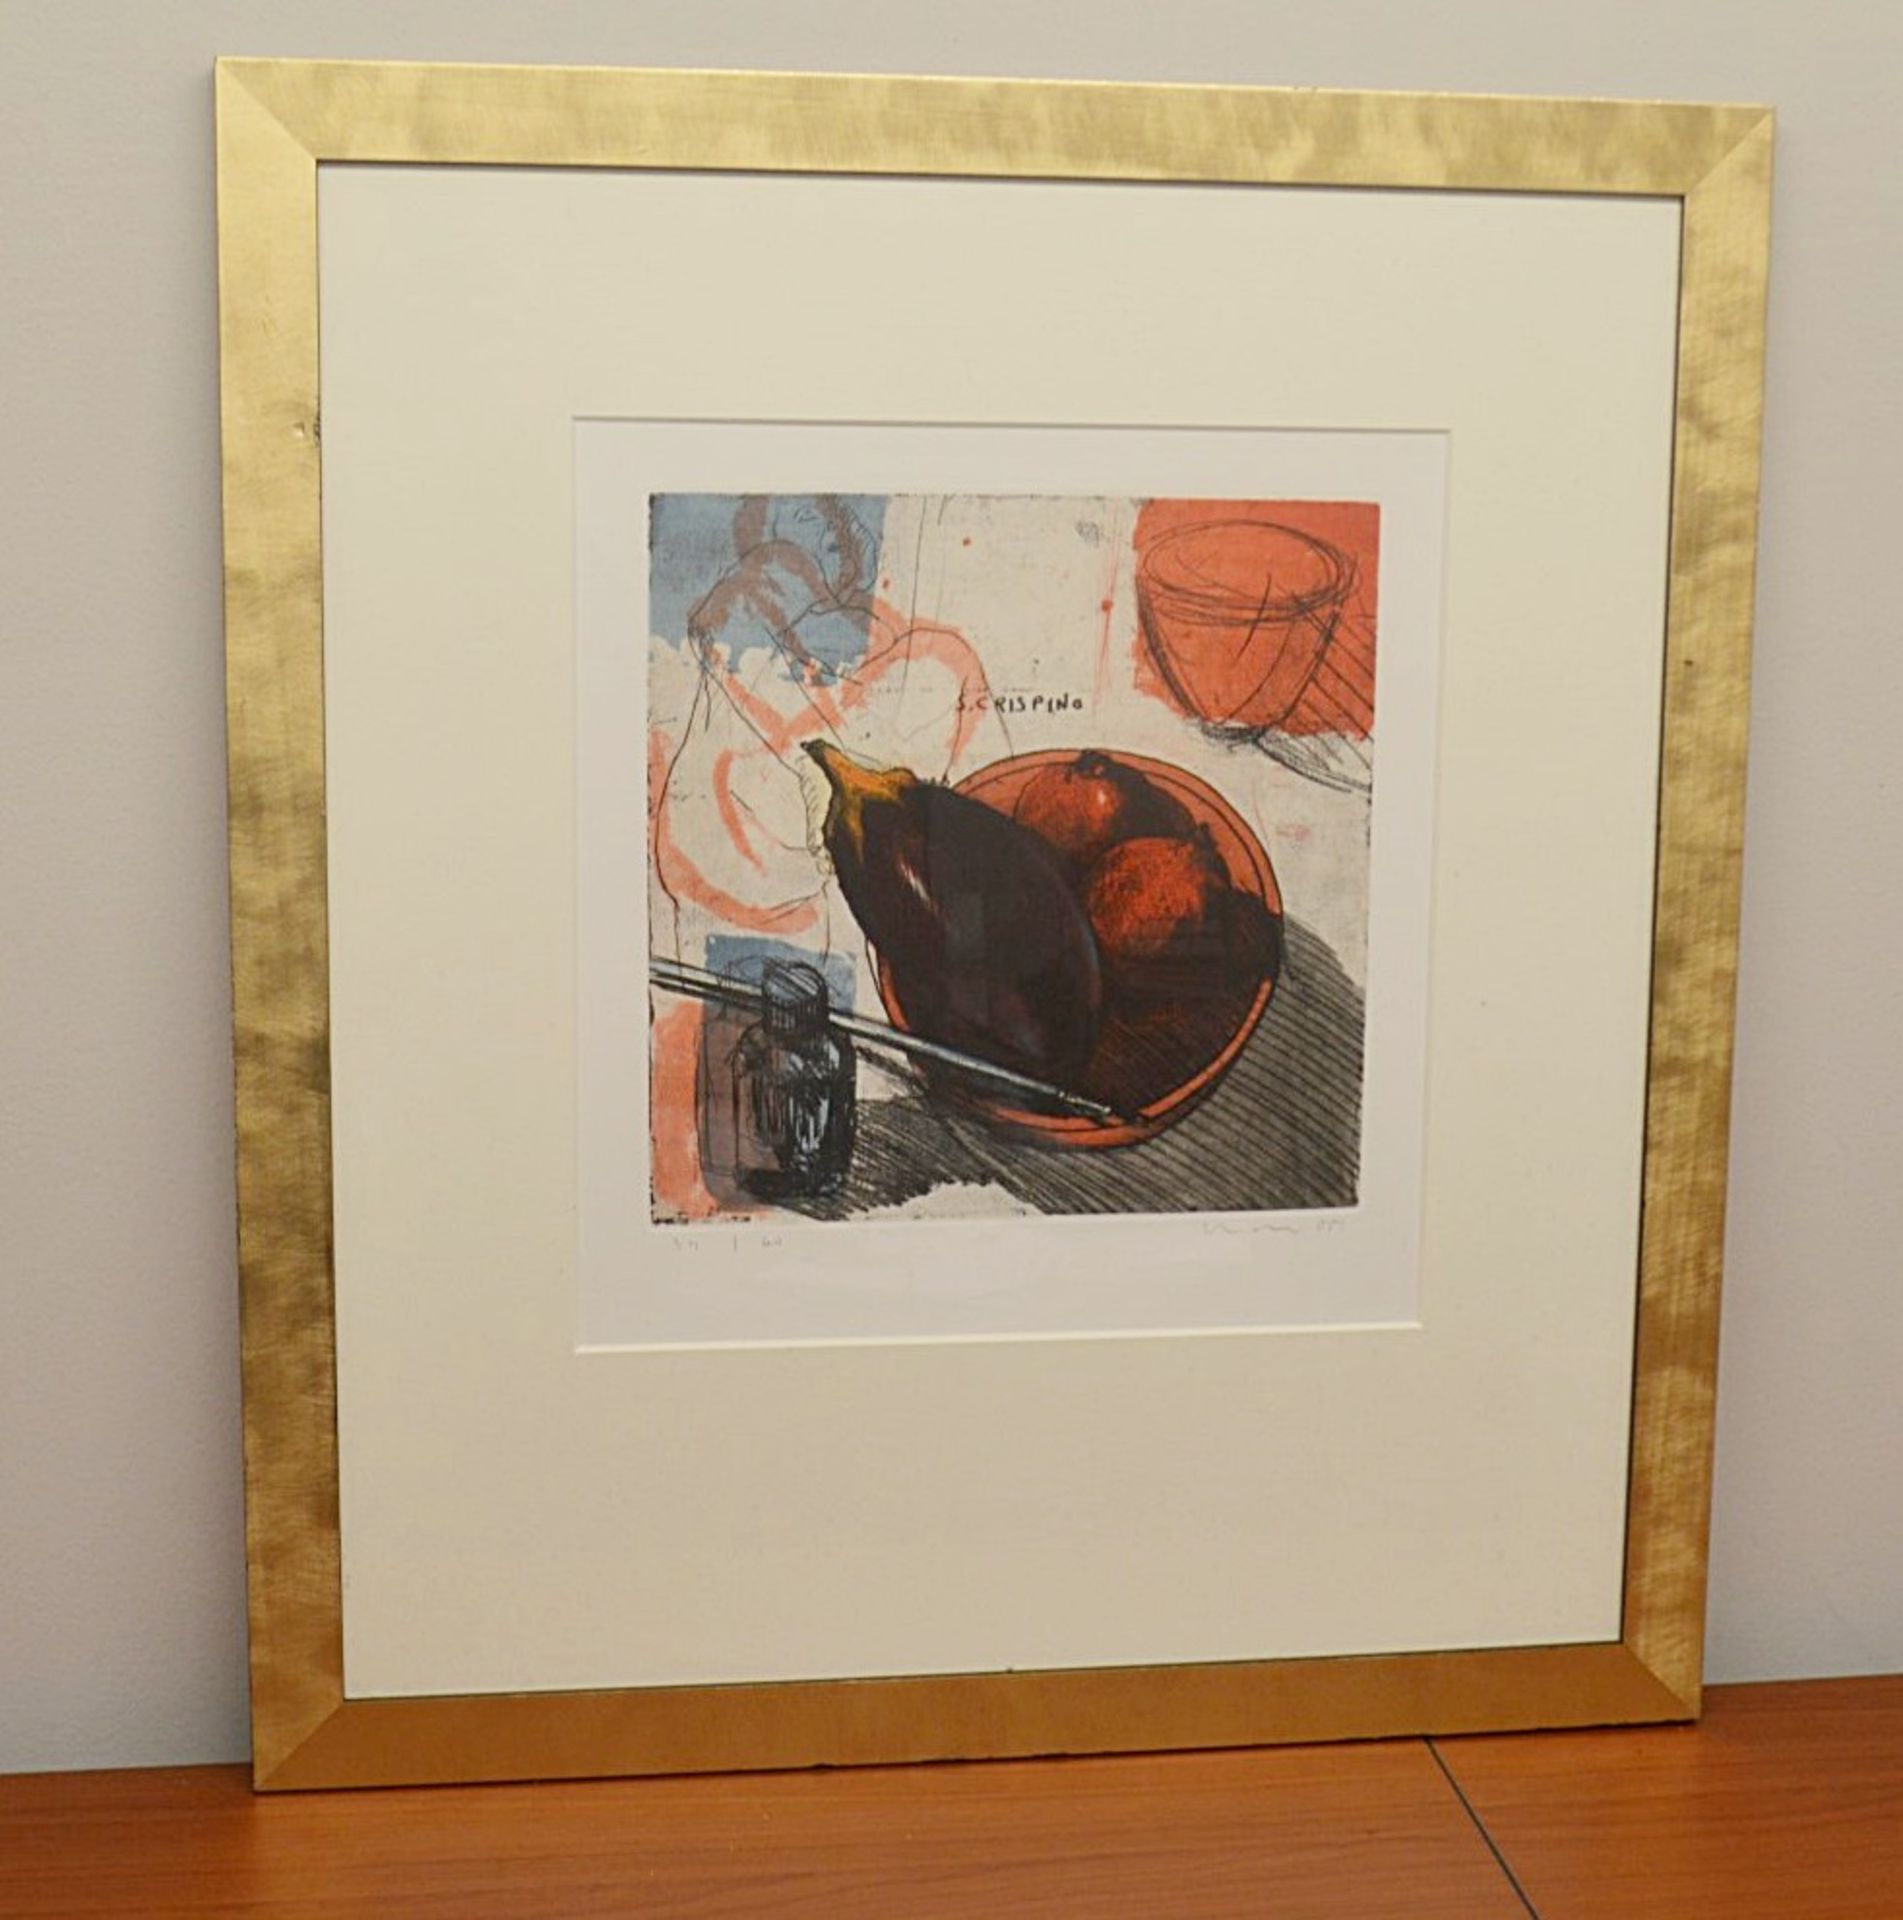 1 x Framed Contemporary Artwork - Signed And Numbered By The Artist 'KURT MAYER'